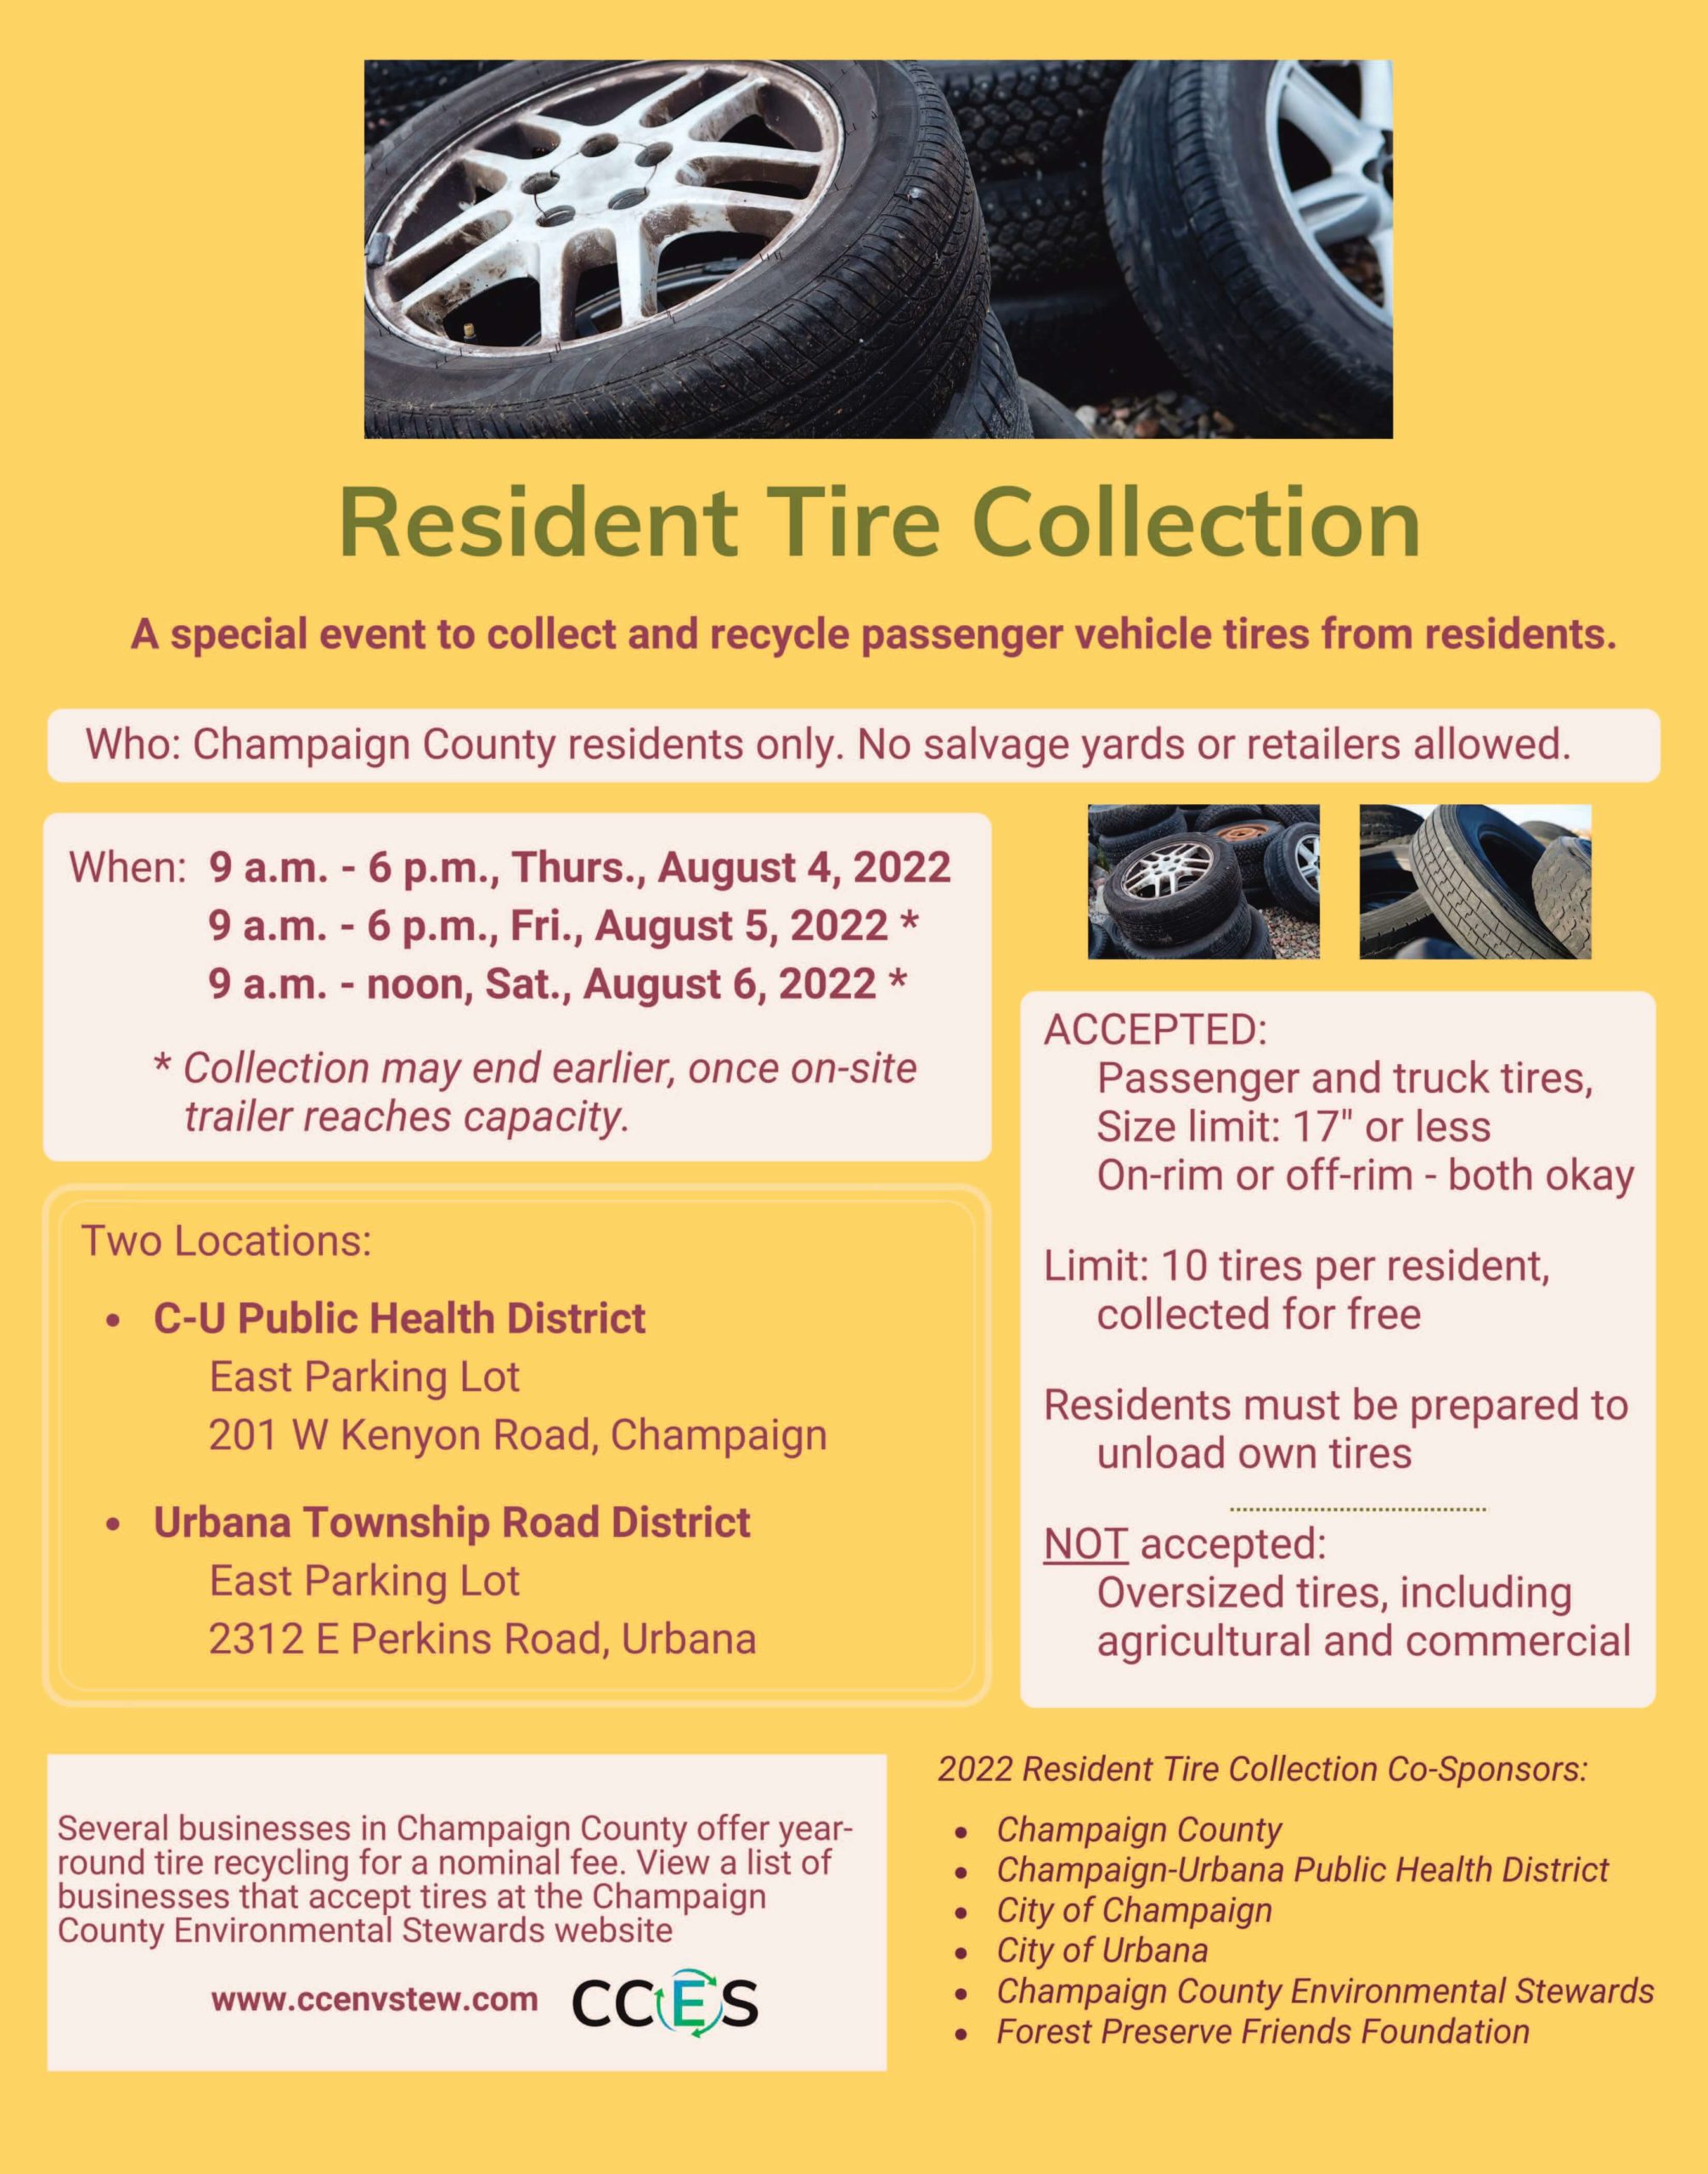 Tire Collection Information